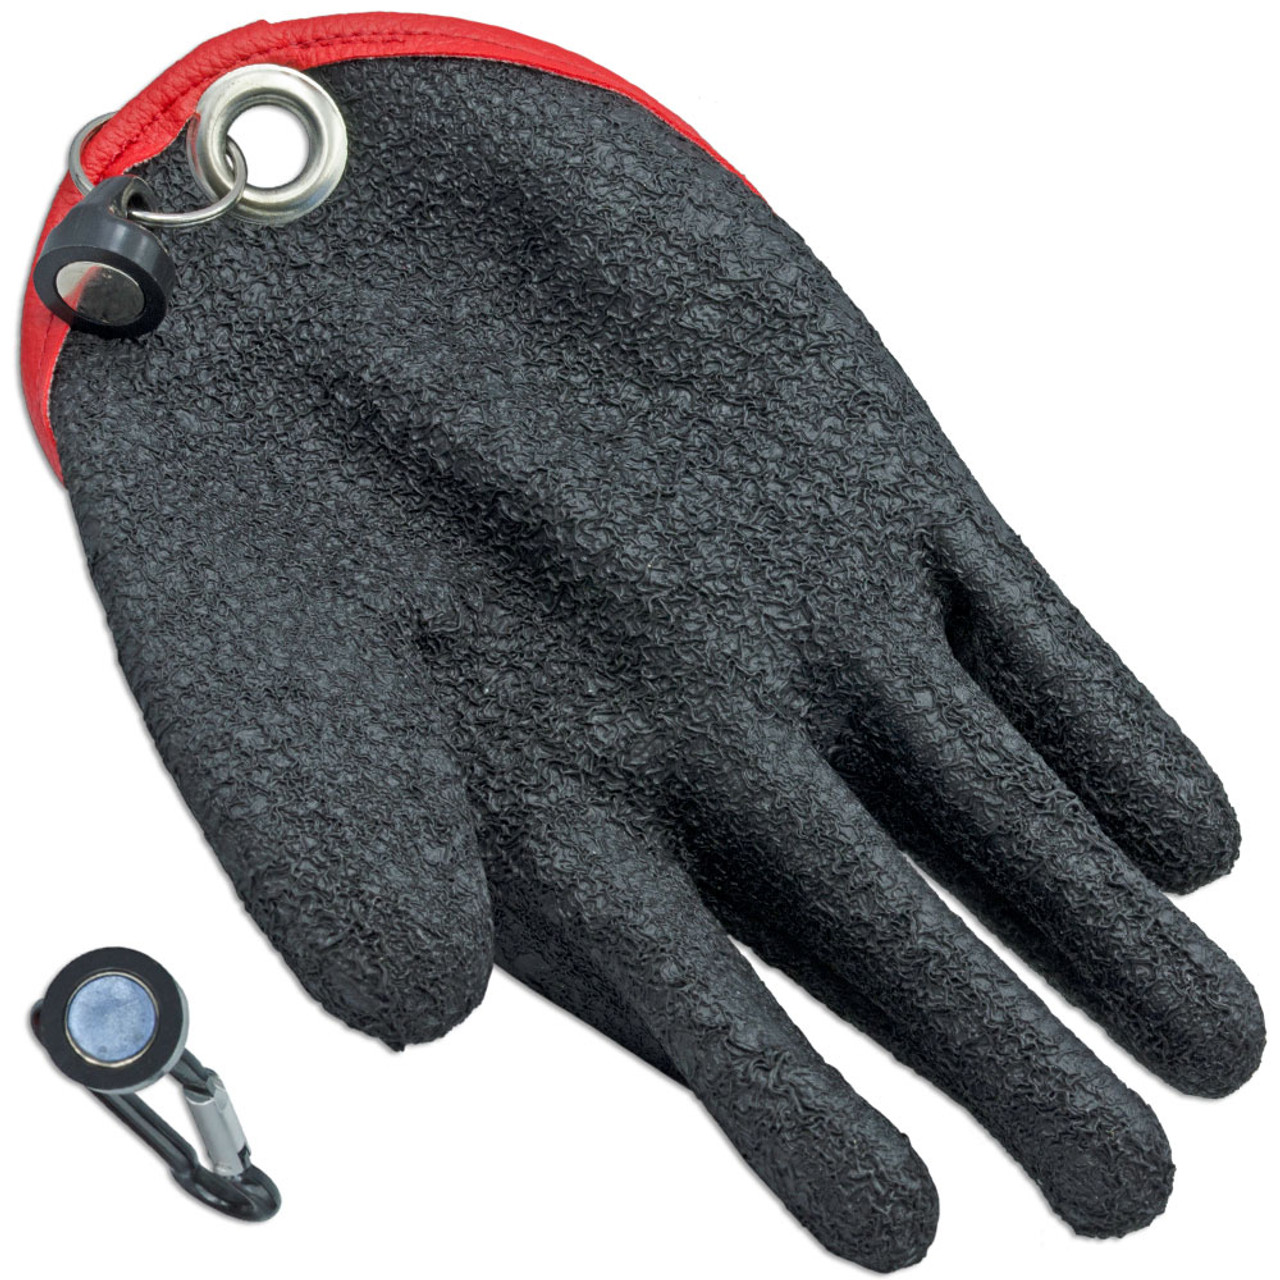 AFN Fish Grabber Glove With Magnetic Release